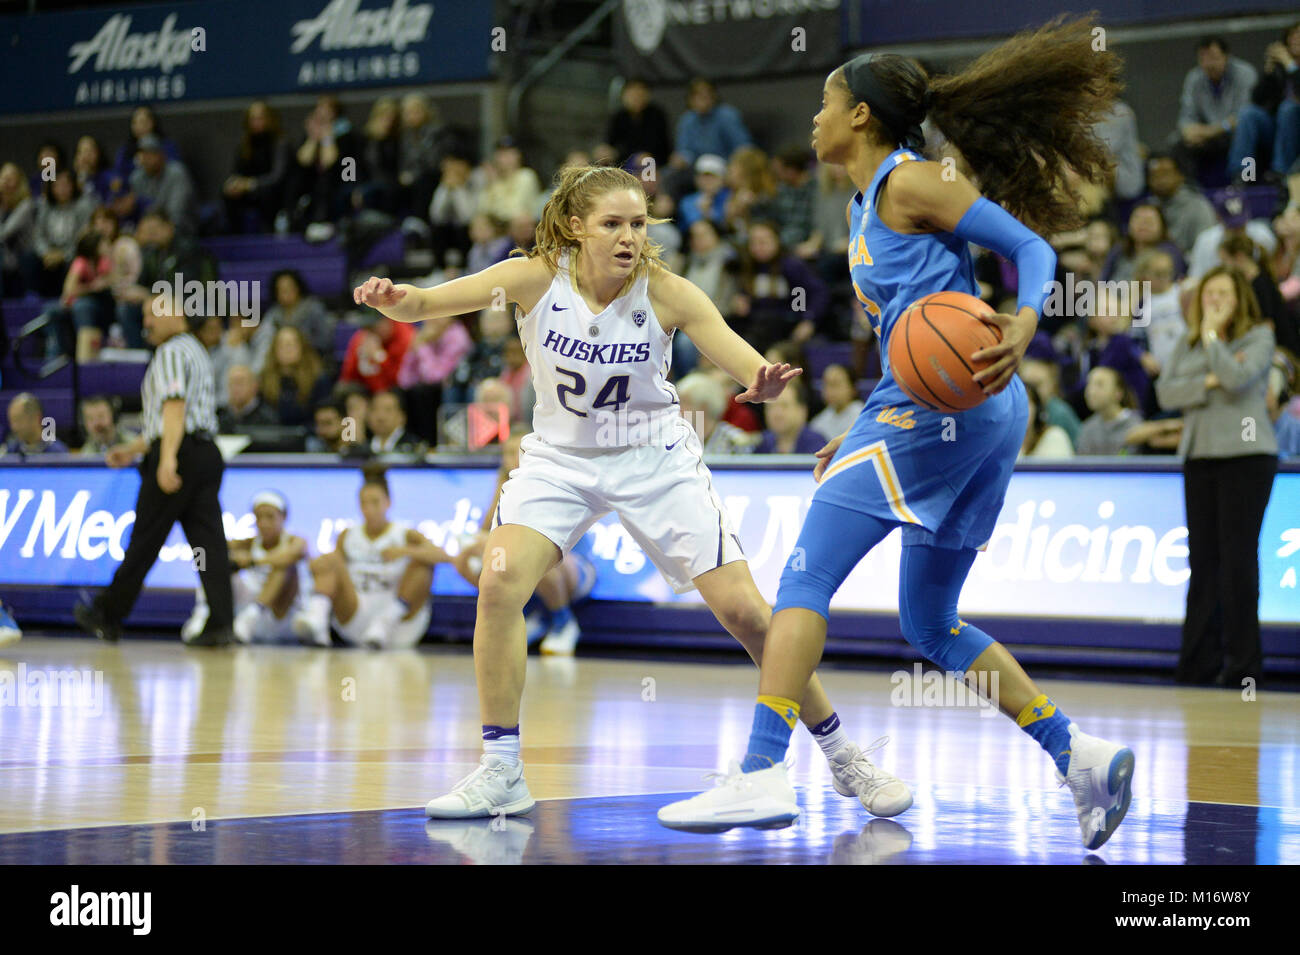 Seattle, WA, USA. 26th Jan, 2018. UW point guard Jenna Moser (24) defends against UCLA guard Jordin Canada (3) during a PAC12 womens basketball game between the Washington Huskies and UCLA Bruins. The game was played at Hec Ed Pavilion in Seattle, WA. Jeff Halstead/CSM/Alamy Live News Stock Photo